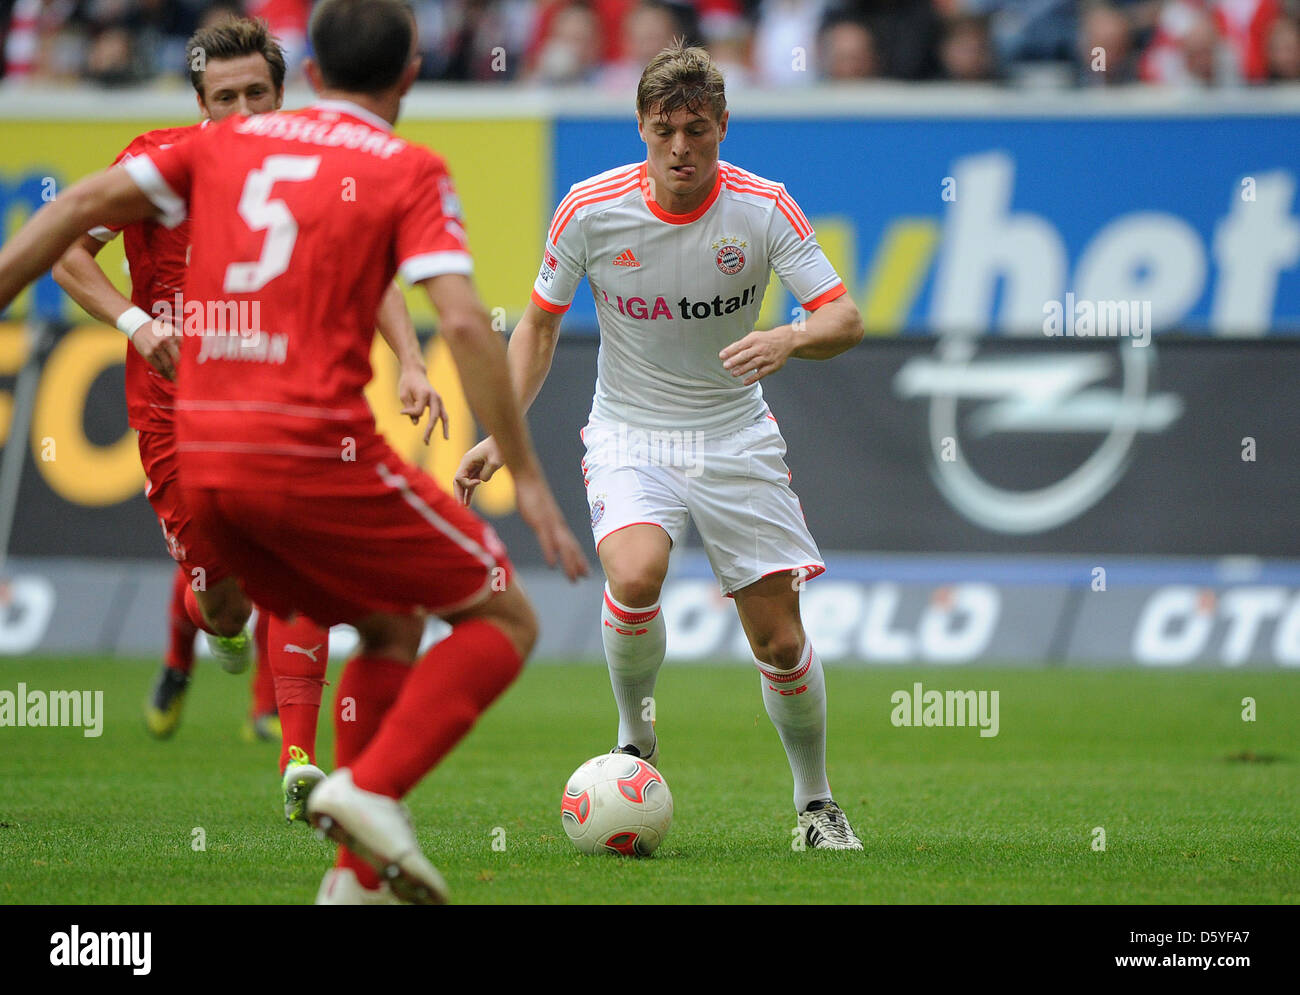 Munich's Toni Kroos (R) vies for the ball with Duesseldorf's Juanan during the German Bundesliga match between Fortuna Duesseldorf vs. FC Bayern Munich at Esprit Arena in Duesseldorf, Germany, 20 October 2012. Photo: Jonas Guettler Stock Photo